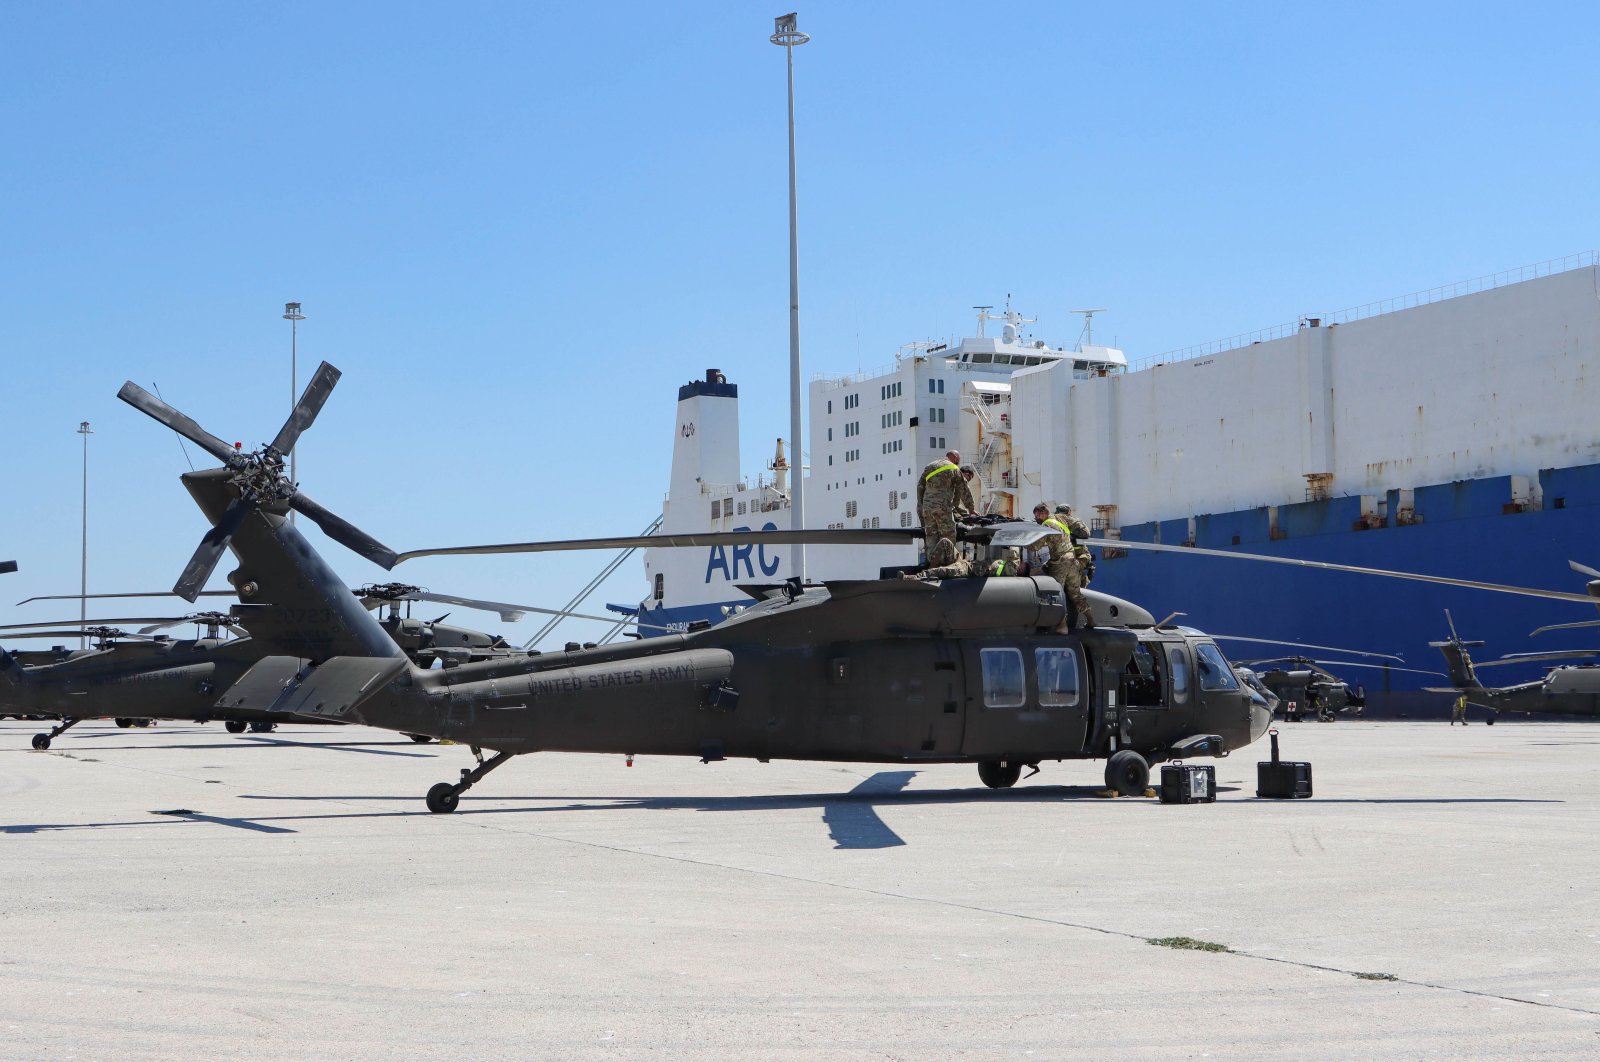 U.S. Army troops assemble and fix their helicopters after unloading them from the ARC ship at the port of Alexandroupoli (Dedeağaç), Greece, July 23, 2020. (Photo by Getty Images)